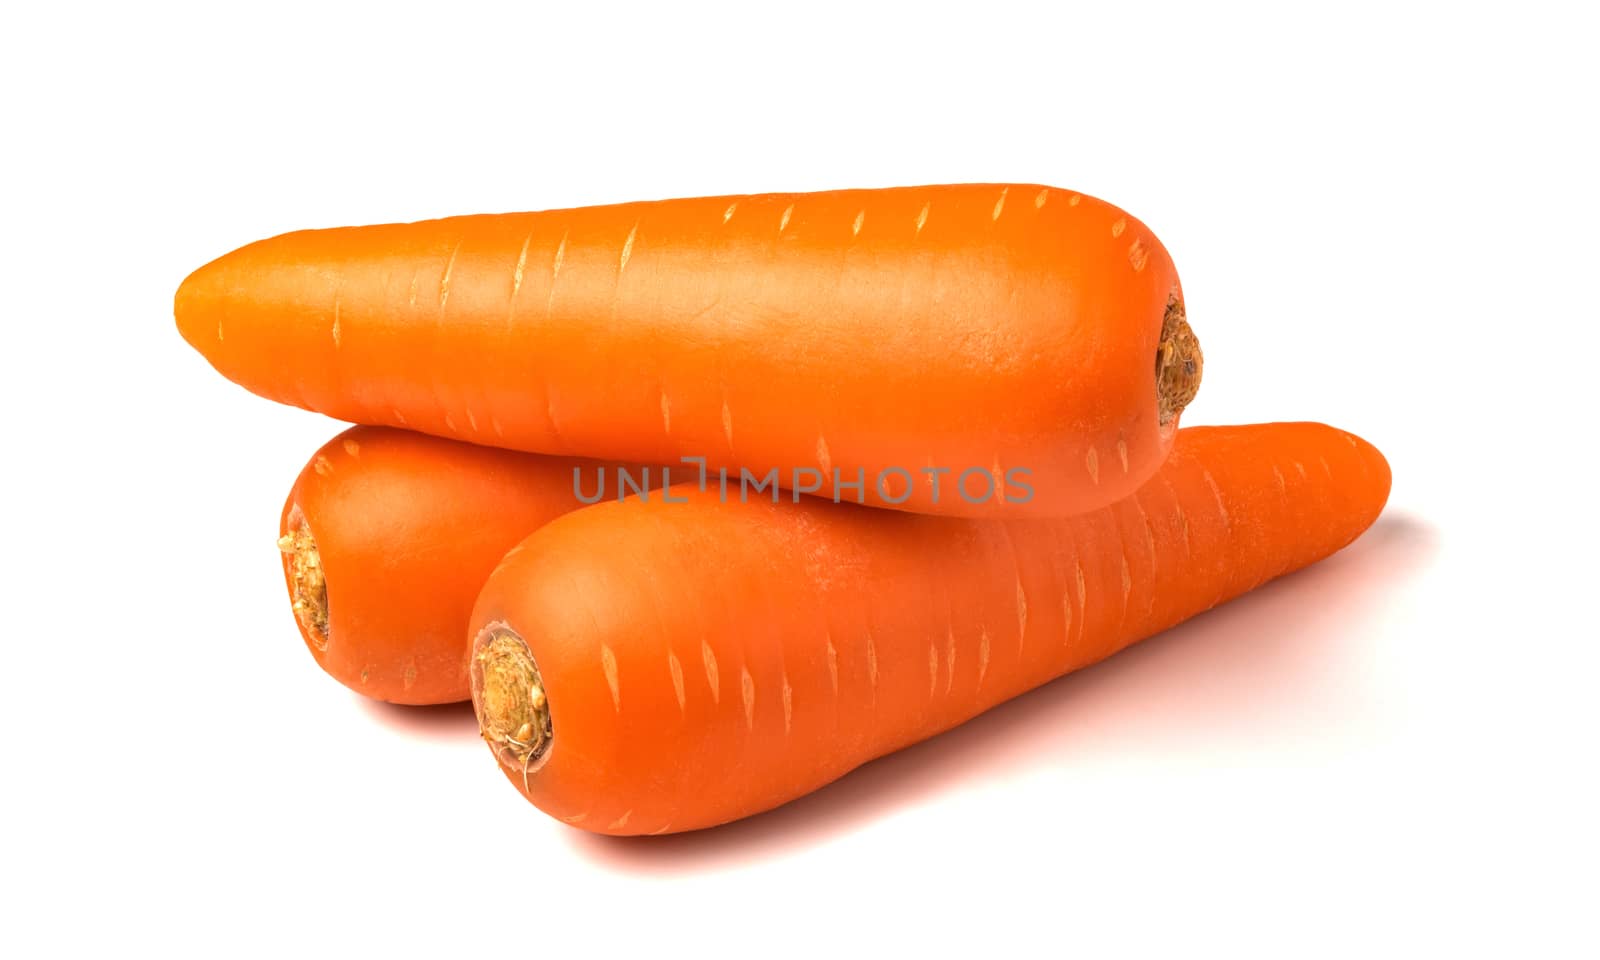 Fresh carrots isolated on white background. Close up of carrots. by kirisa99